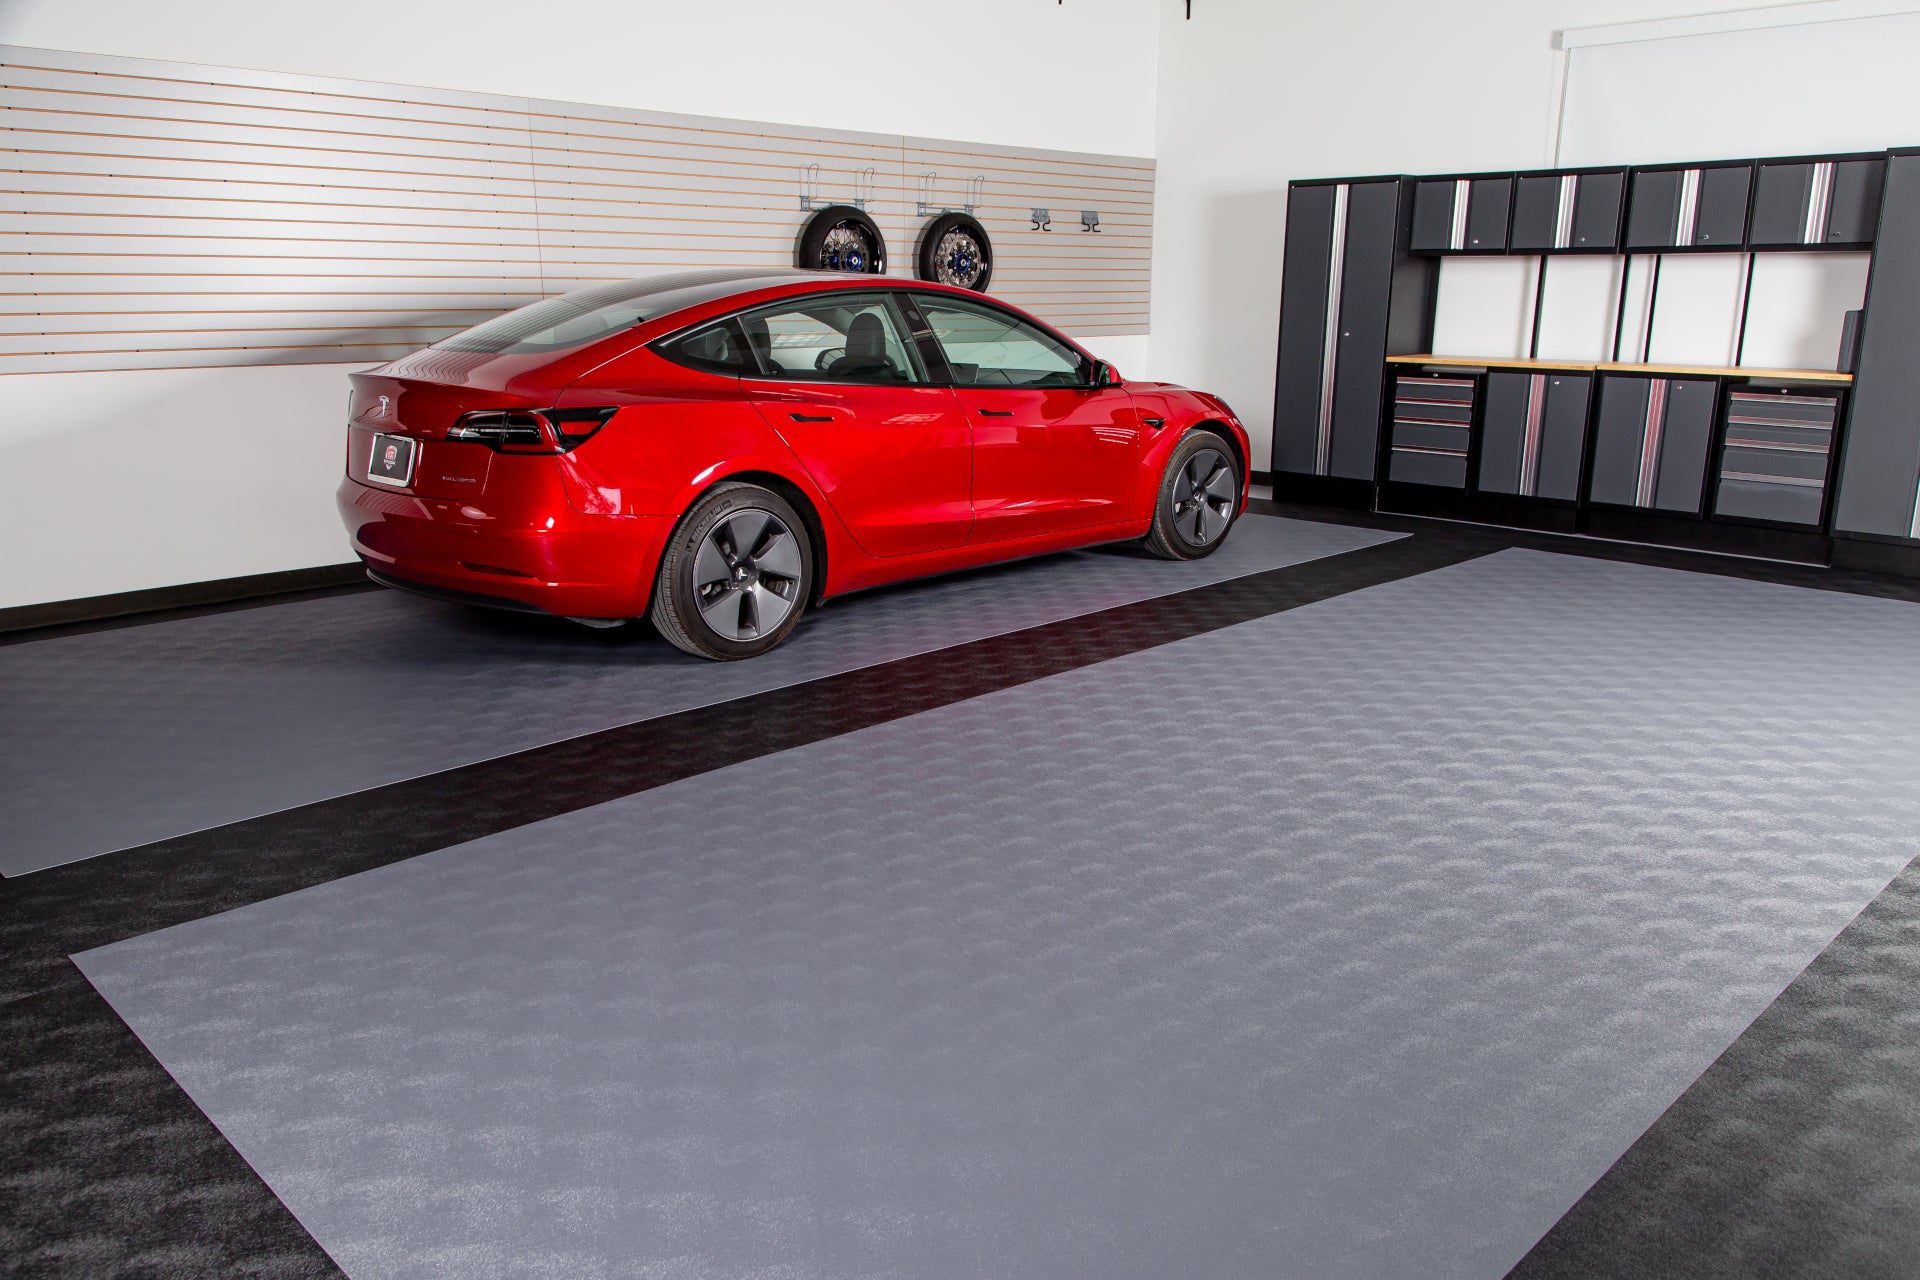 G-Floor garage mats make a great parking pad when paired with runners